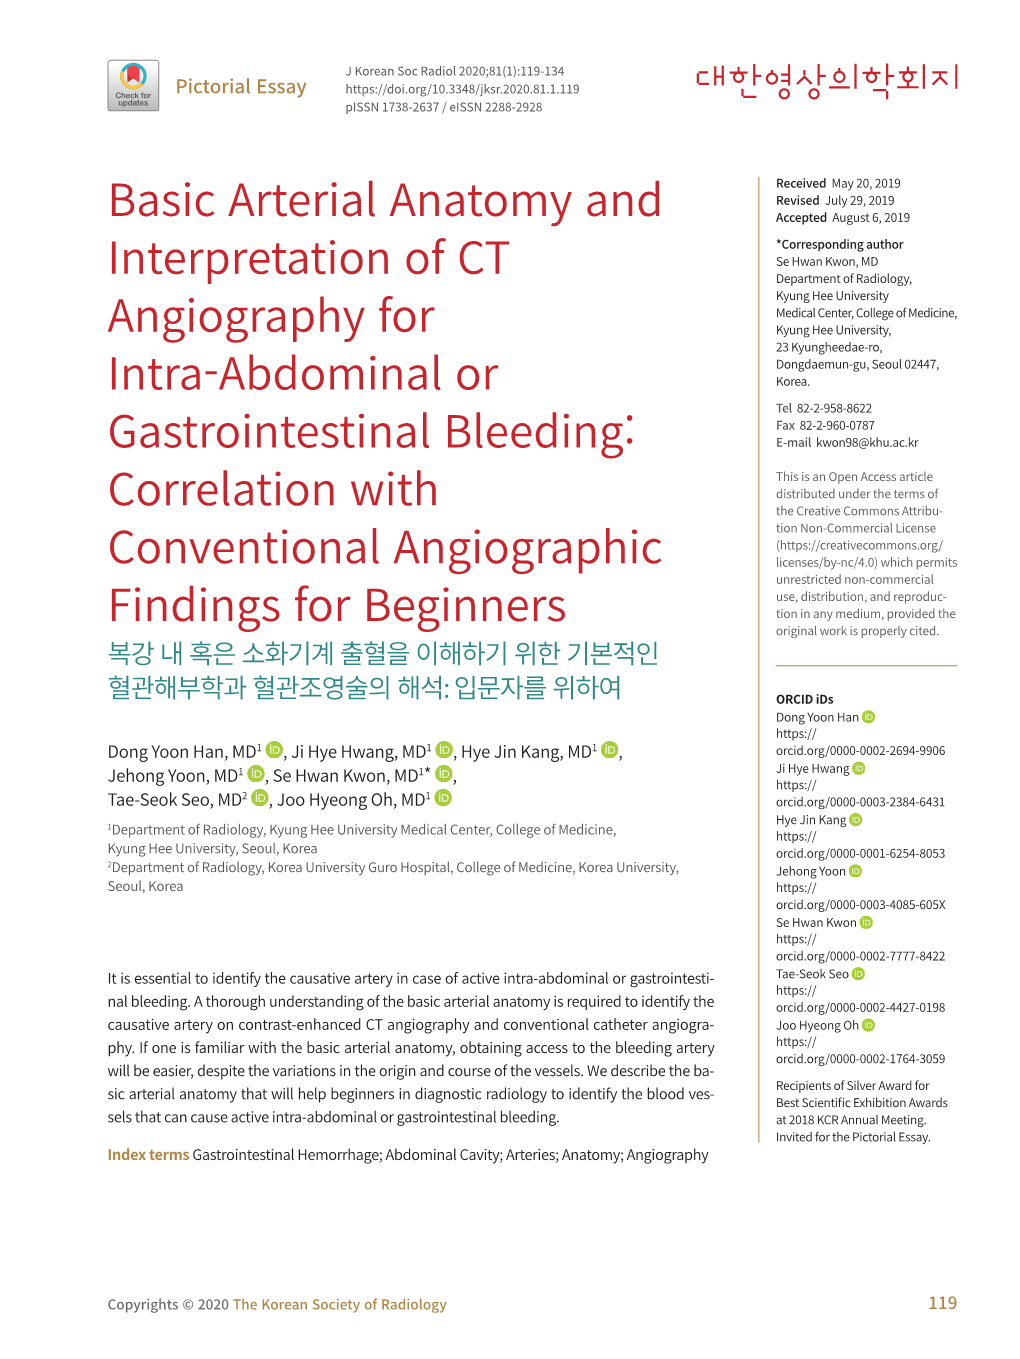 Basic Arterial Anatomy and Interpretation of CT Angiography For